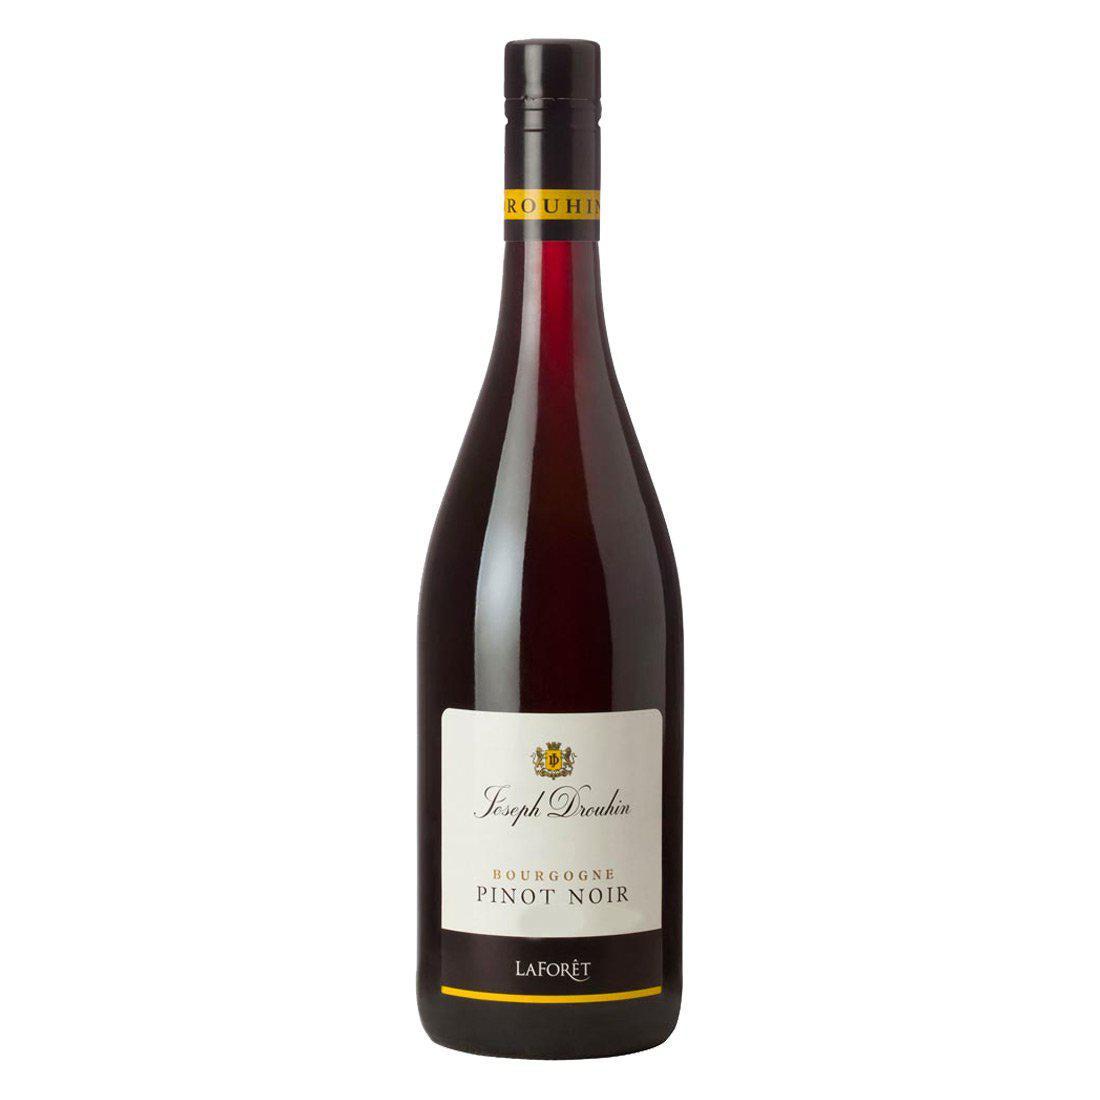 Joseph Drouhin Laforet Bourgogne Pinot Noir - 12 Bottle Case with 5% Discount Included-Red Wine-World Wine